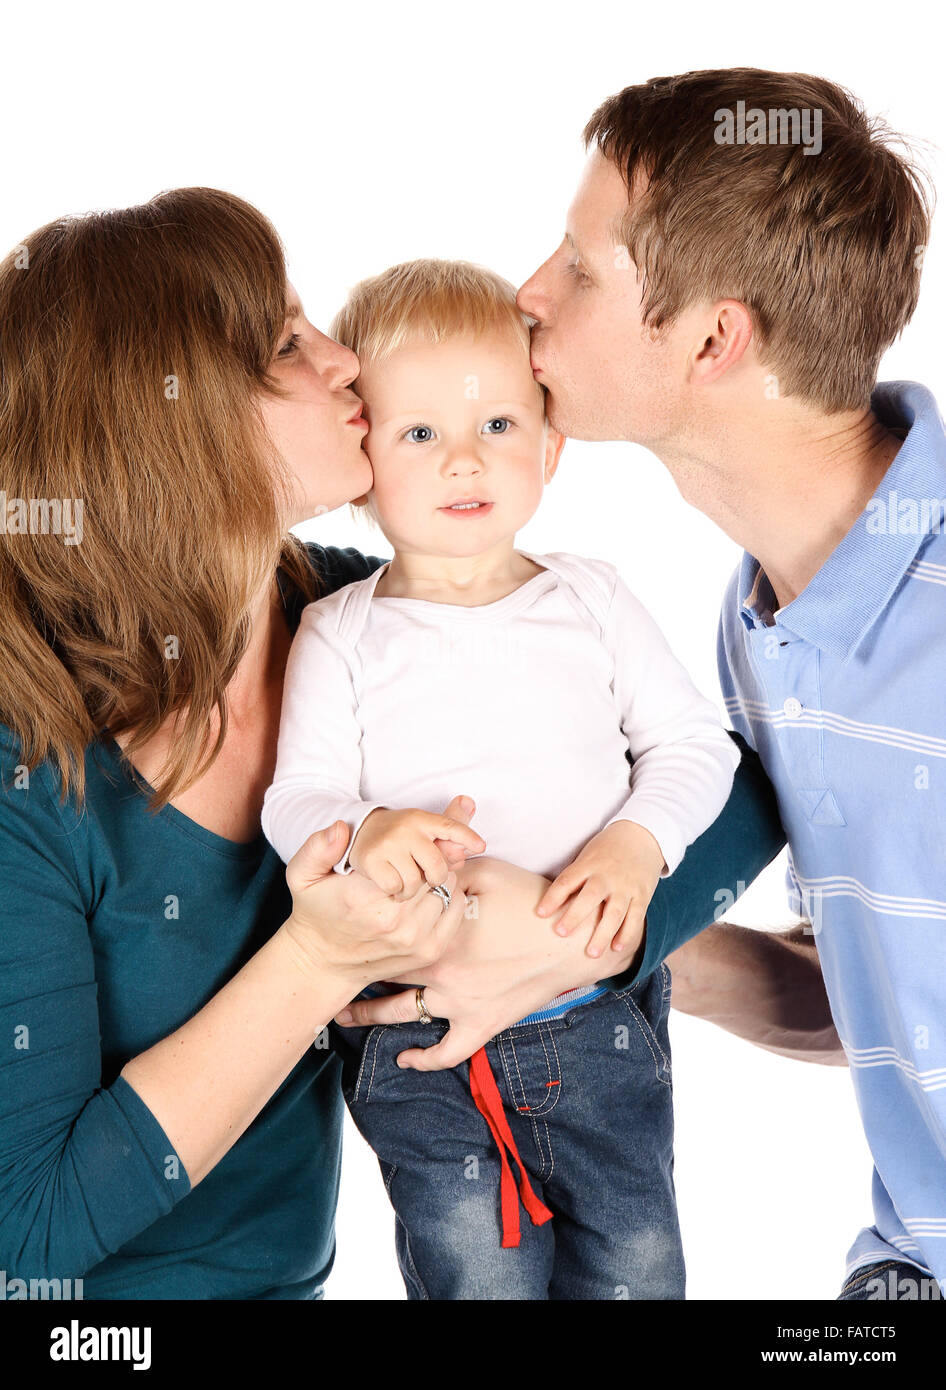 Caucasian family with mom dad and baby boy. The parents are kissing their son. Image is isolated on a white background. Stock Photo